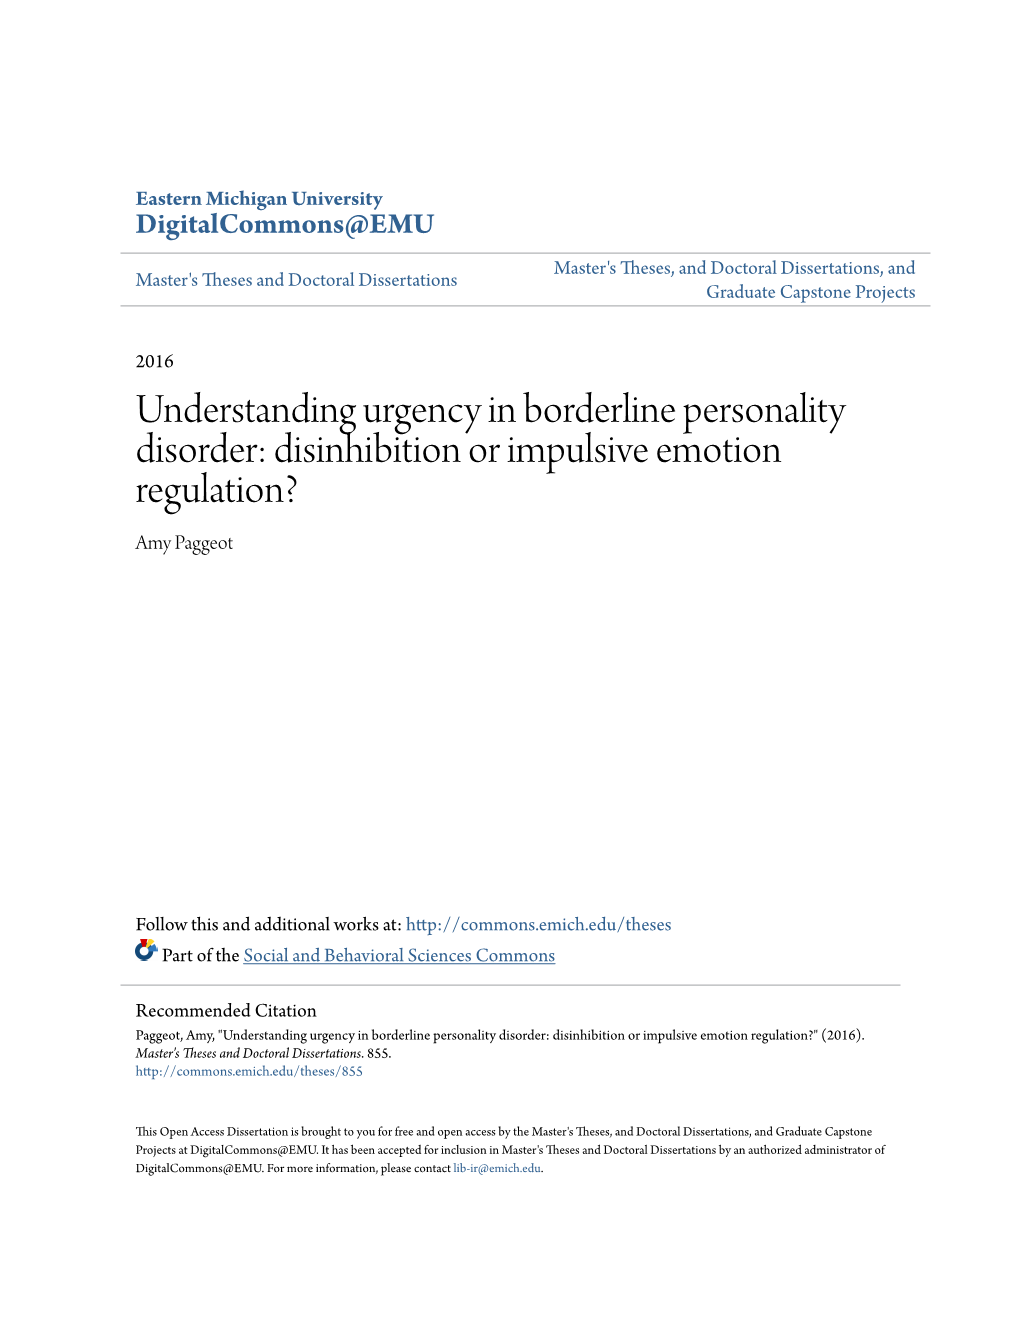 Understanding Urgency in Borderline Personality Disorder: Disinhibition Or Impulsive Emotion Regulation? Amy Paggeot